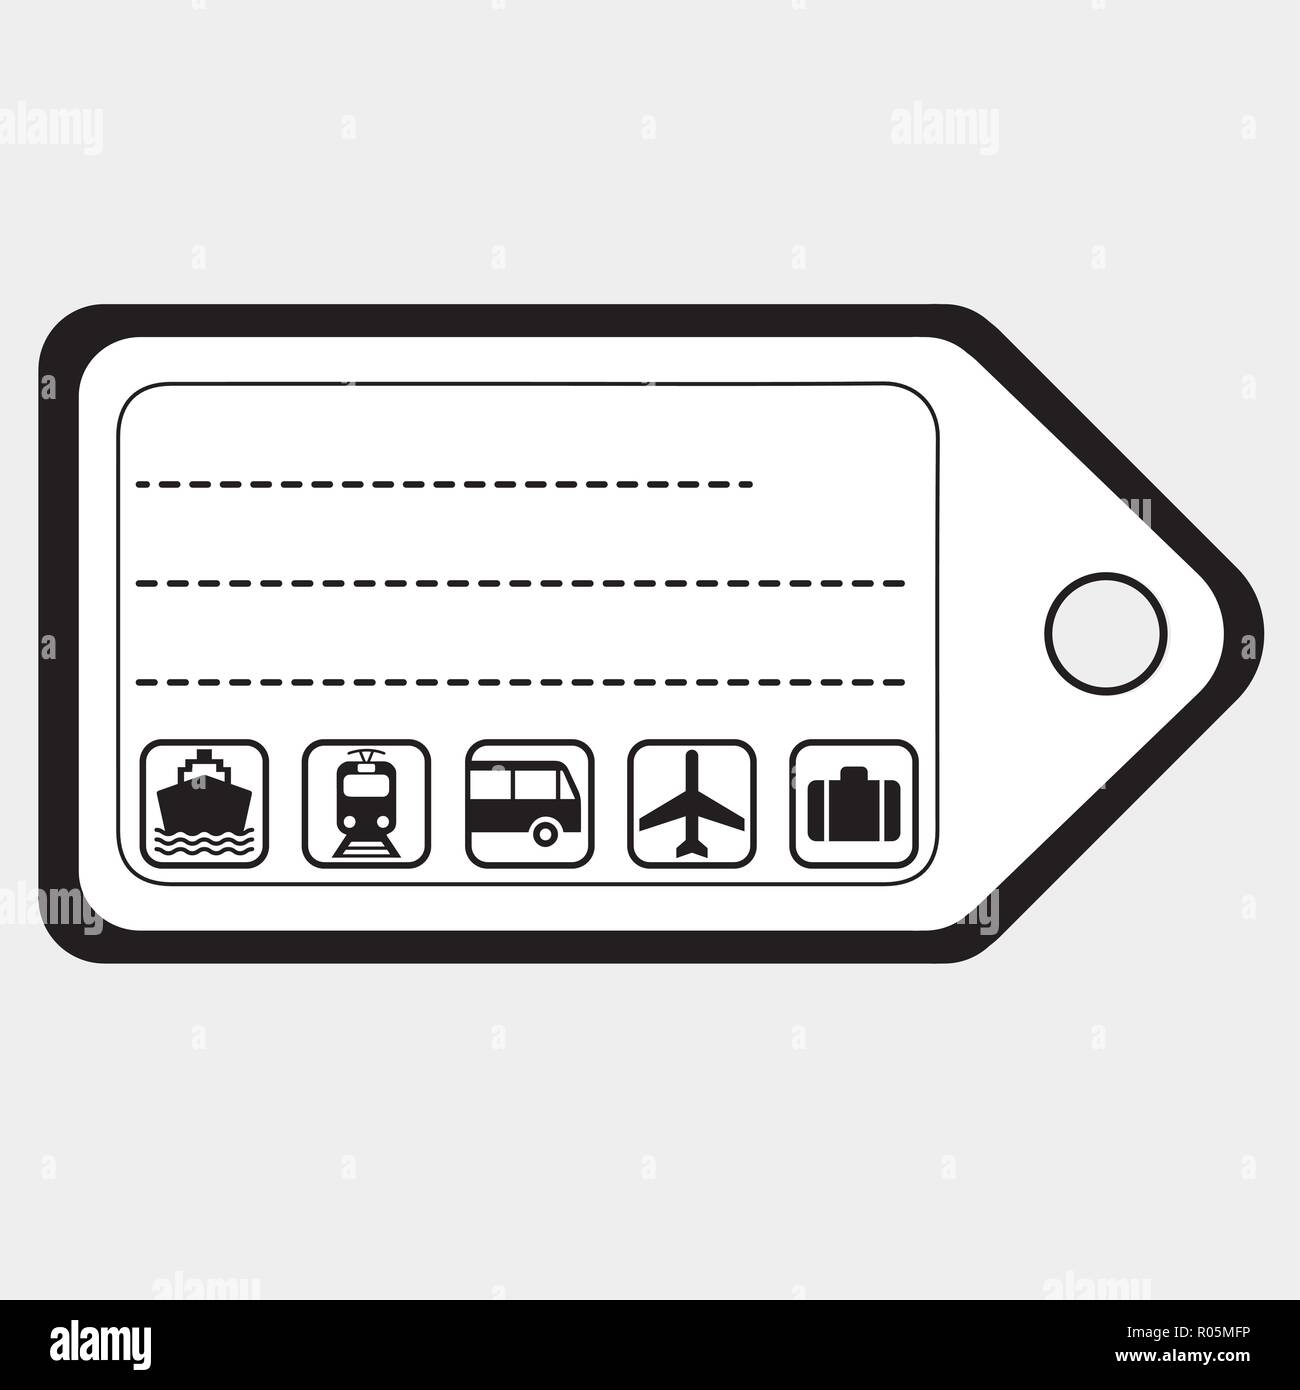 Luggage tag with symbols of boat, train, bus, plane, suitcase Stock Vector